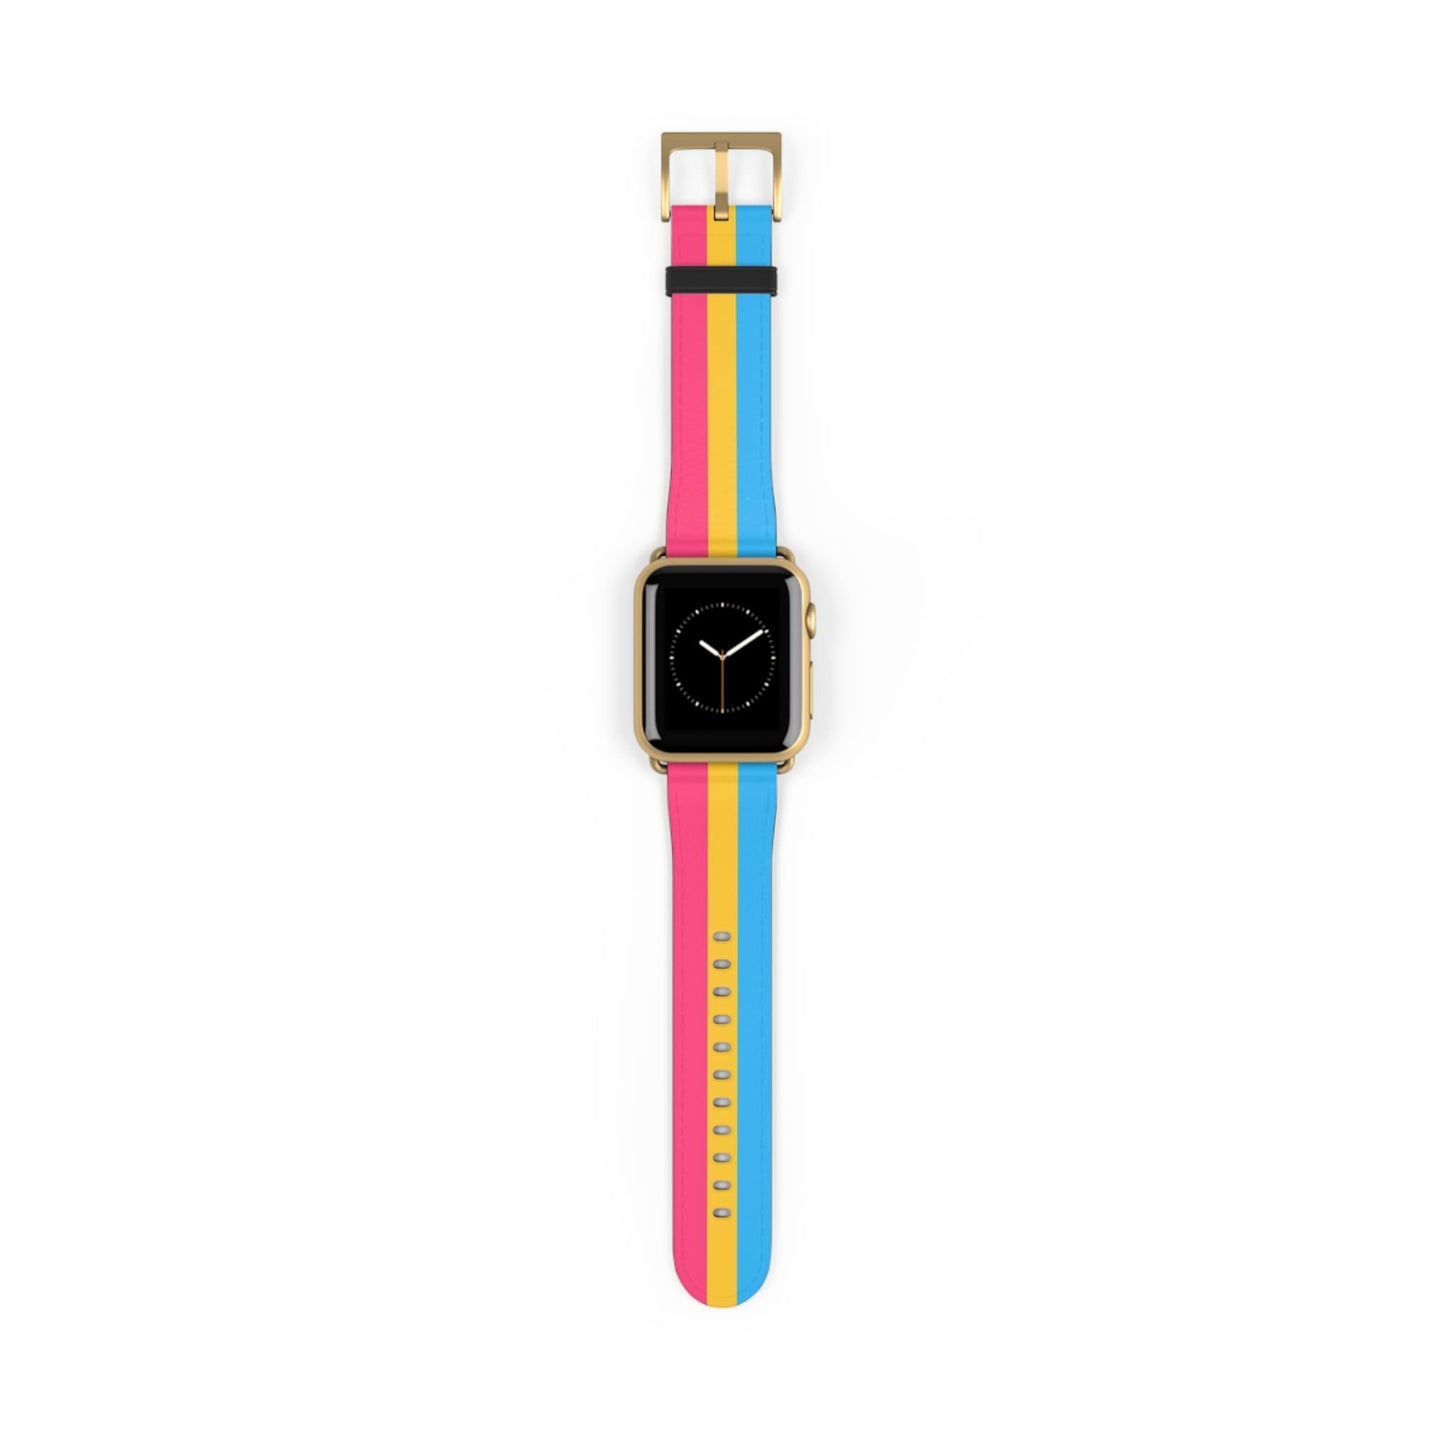 pansexual watch band for Apple iwatch, gold